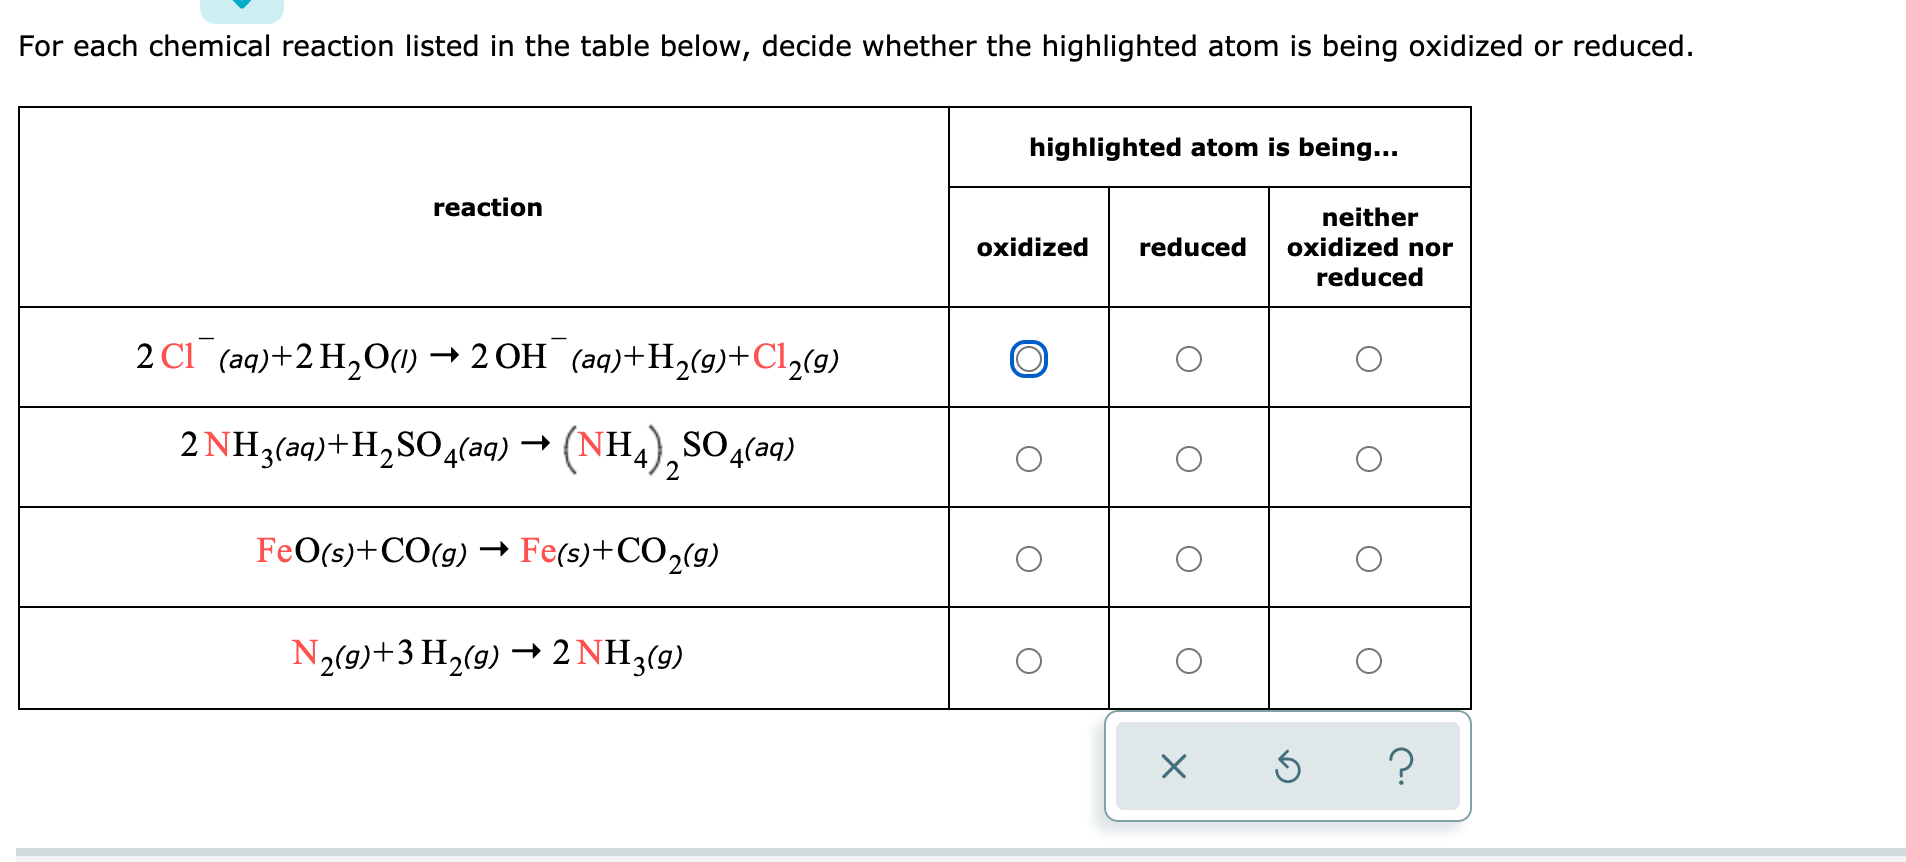 For each chemical reaction listed in the table below, decide whether the highlighted atom is being oxidized or reduced.
highlighted atom is being...
reaction
neither
oxidized
reduced
oxidized nor
reduced
2 CI (aq)+2 H,O(1) → 2 OH (aq)+H(9)+Cl½(9)
2 NH3(aq)+H,SO4(aq)
–→ (NH,),SO4
SO (aq)
FeO(s)+CO(g) → Fe(s)+CO2(9)
N2(9)+3 H2(9) → 2 NH3(g)
